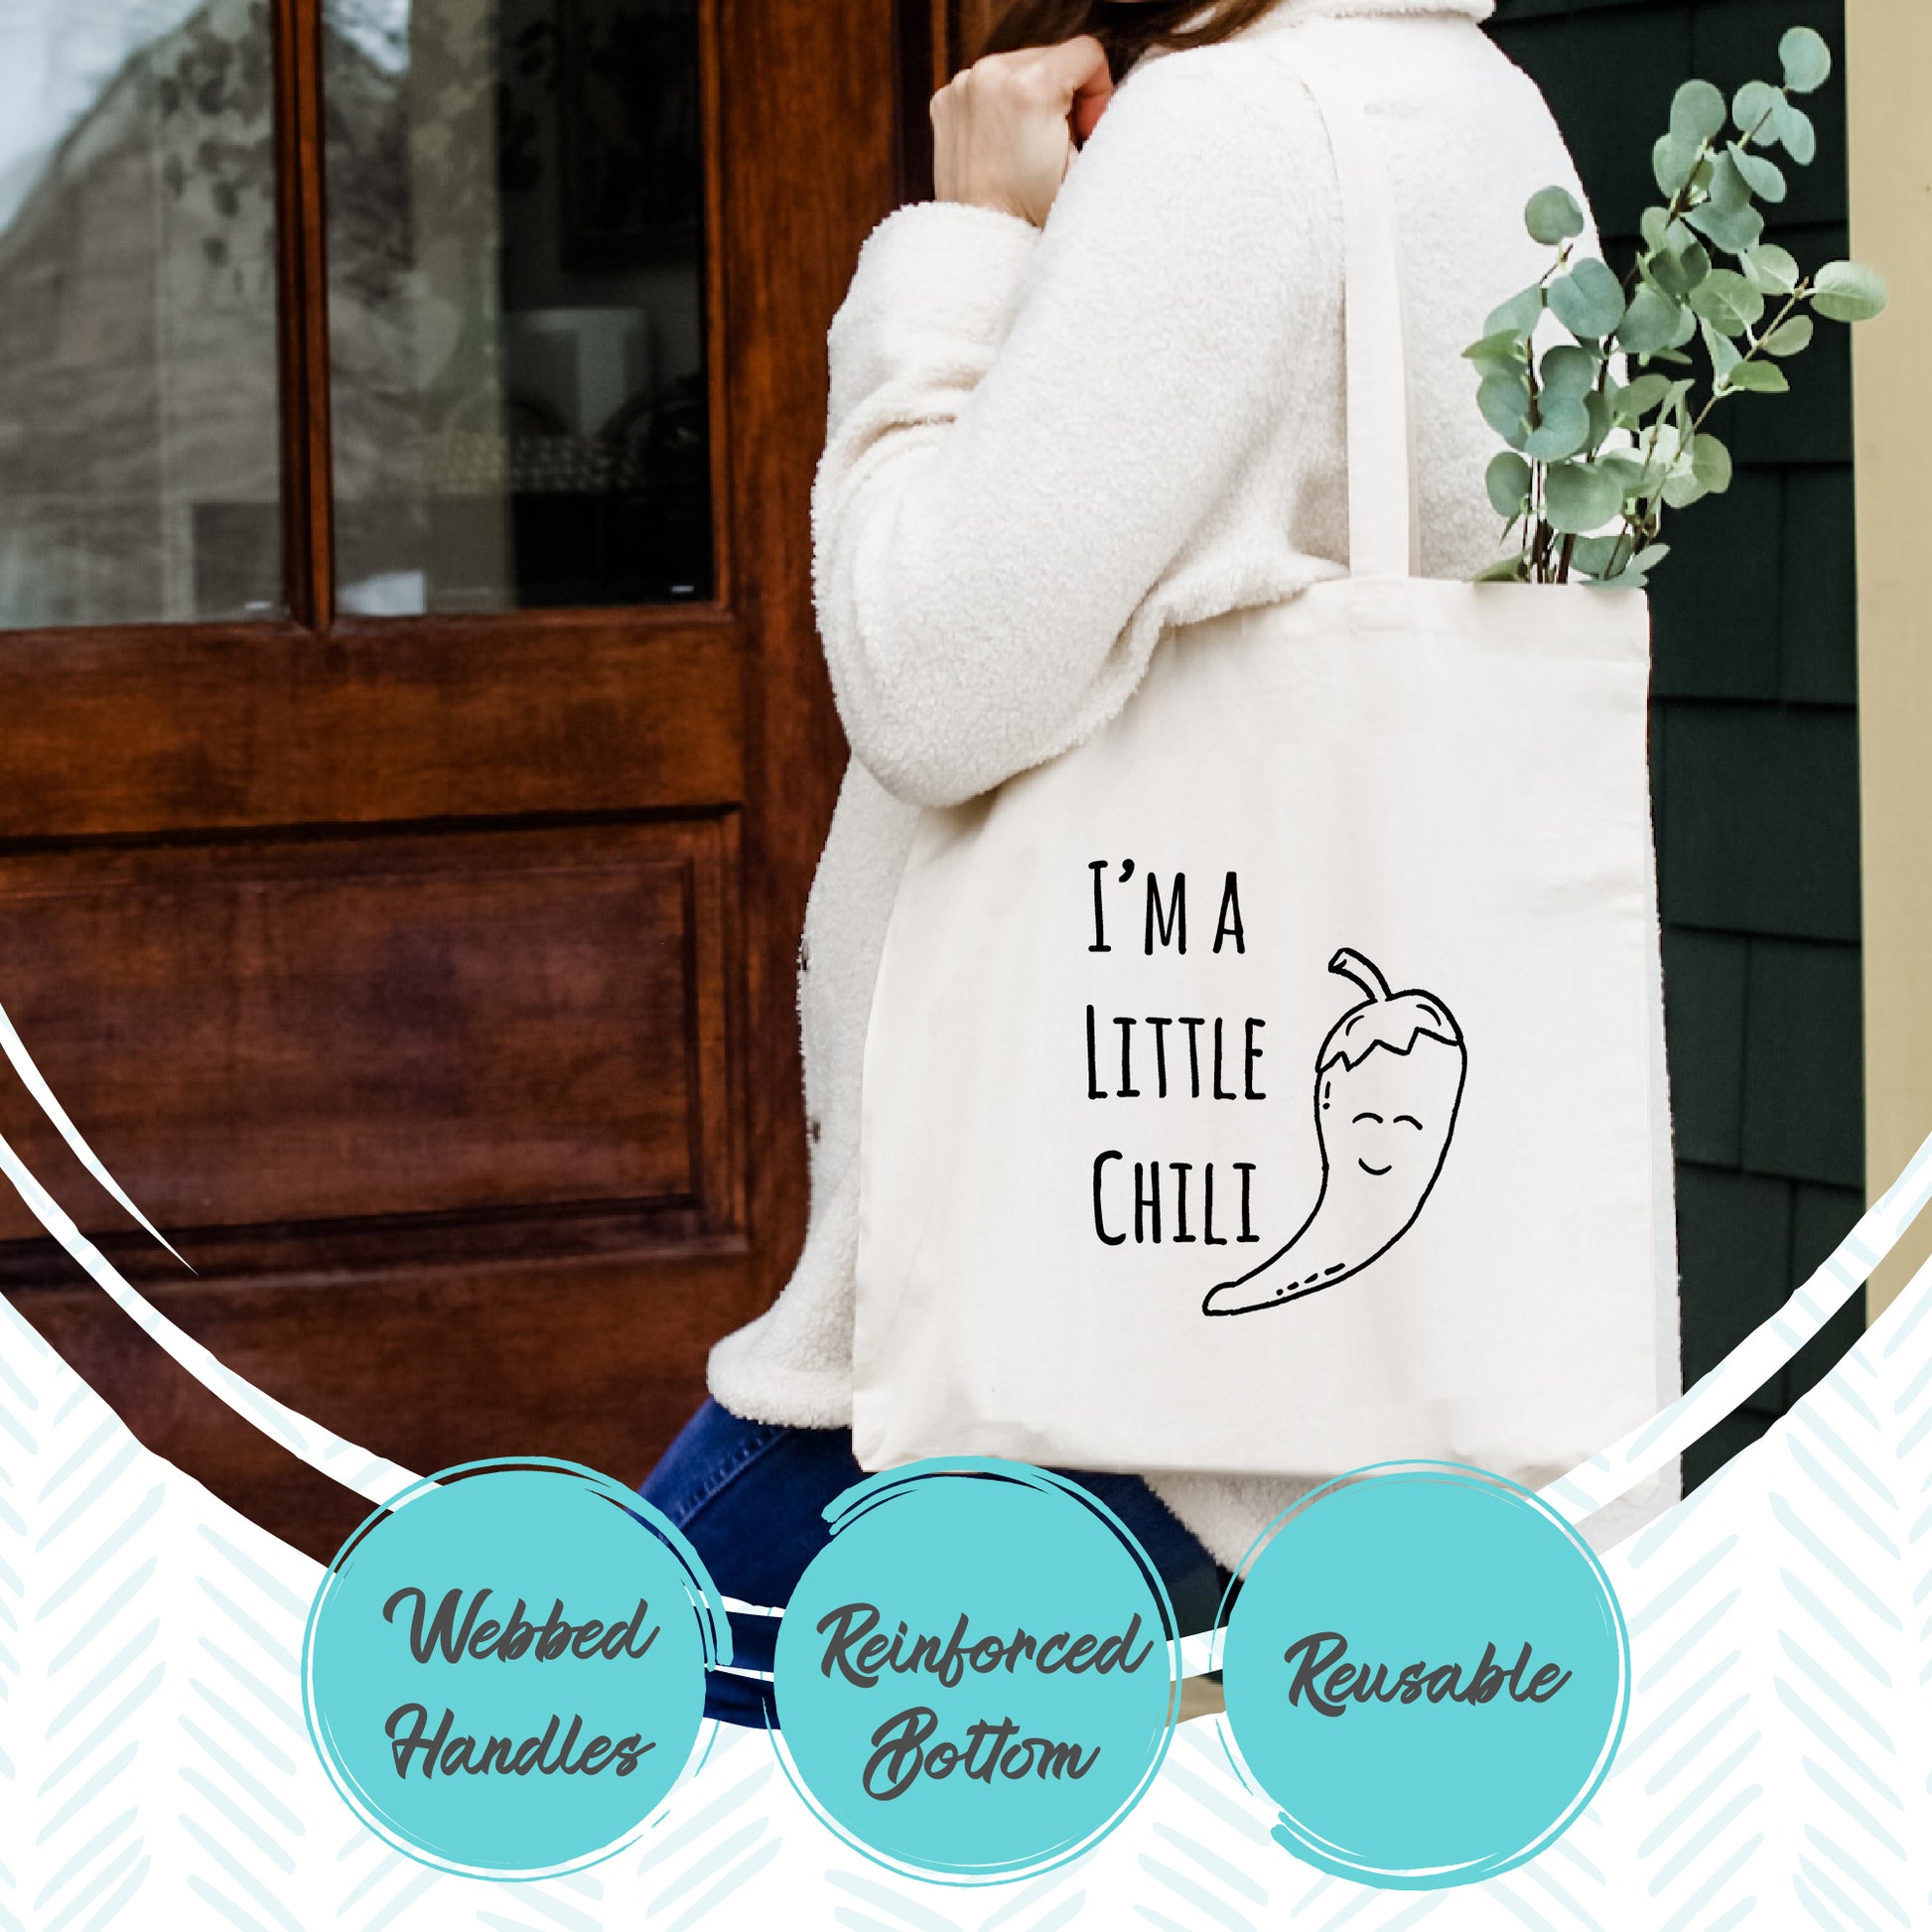 If You Don't Gnome Me By Now - Tote Bag - MoonlightMakers